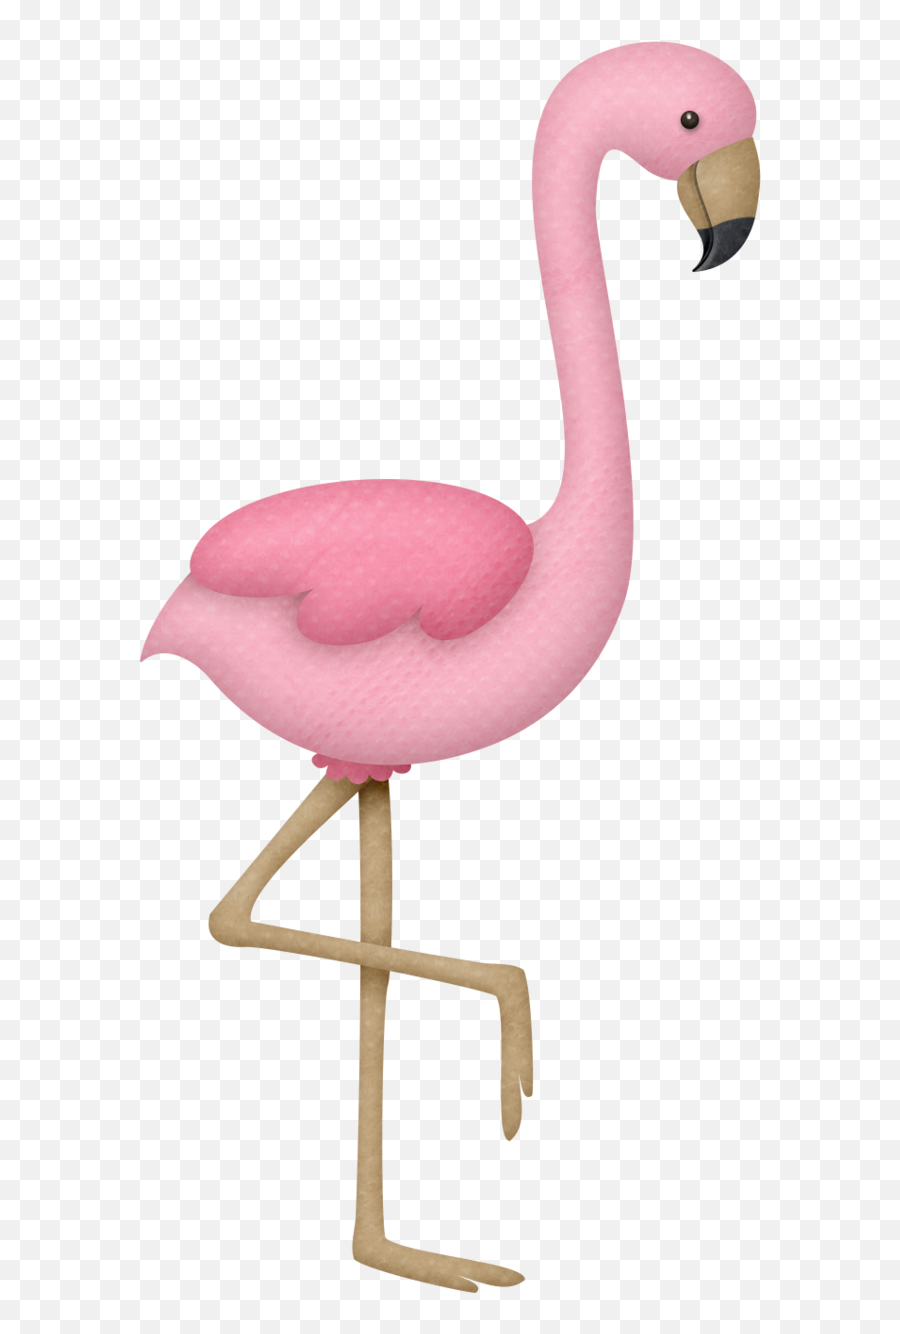 Flamingo Drawings & Sketches For Kids - Kids Art & Craft